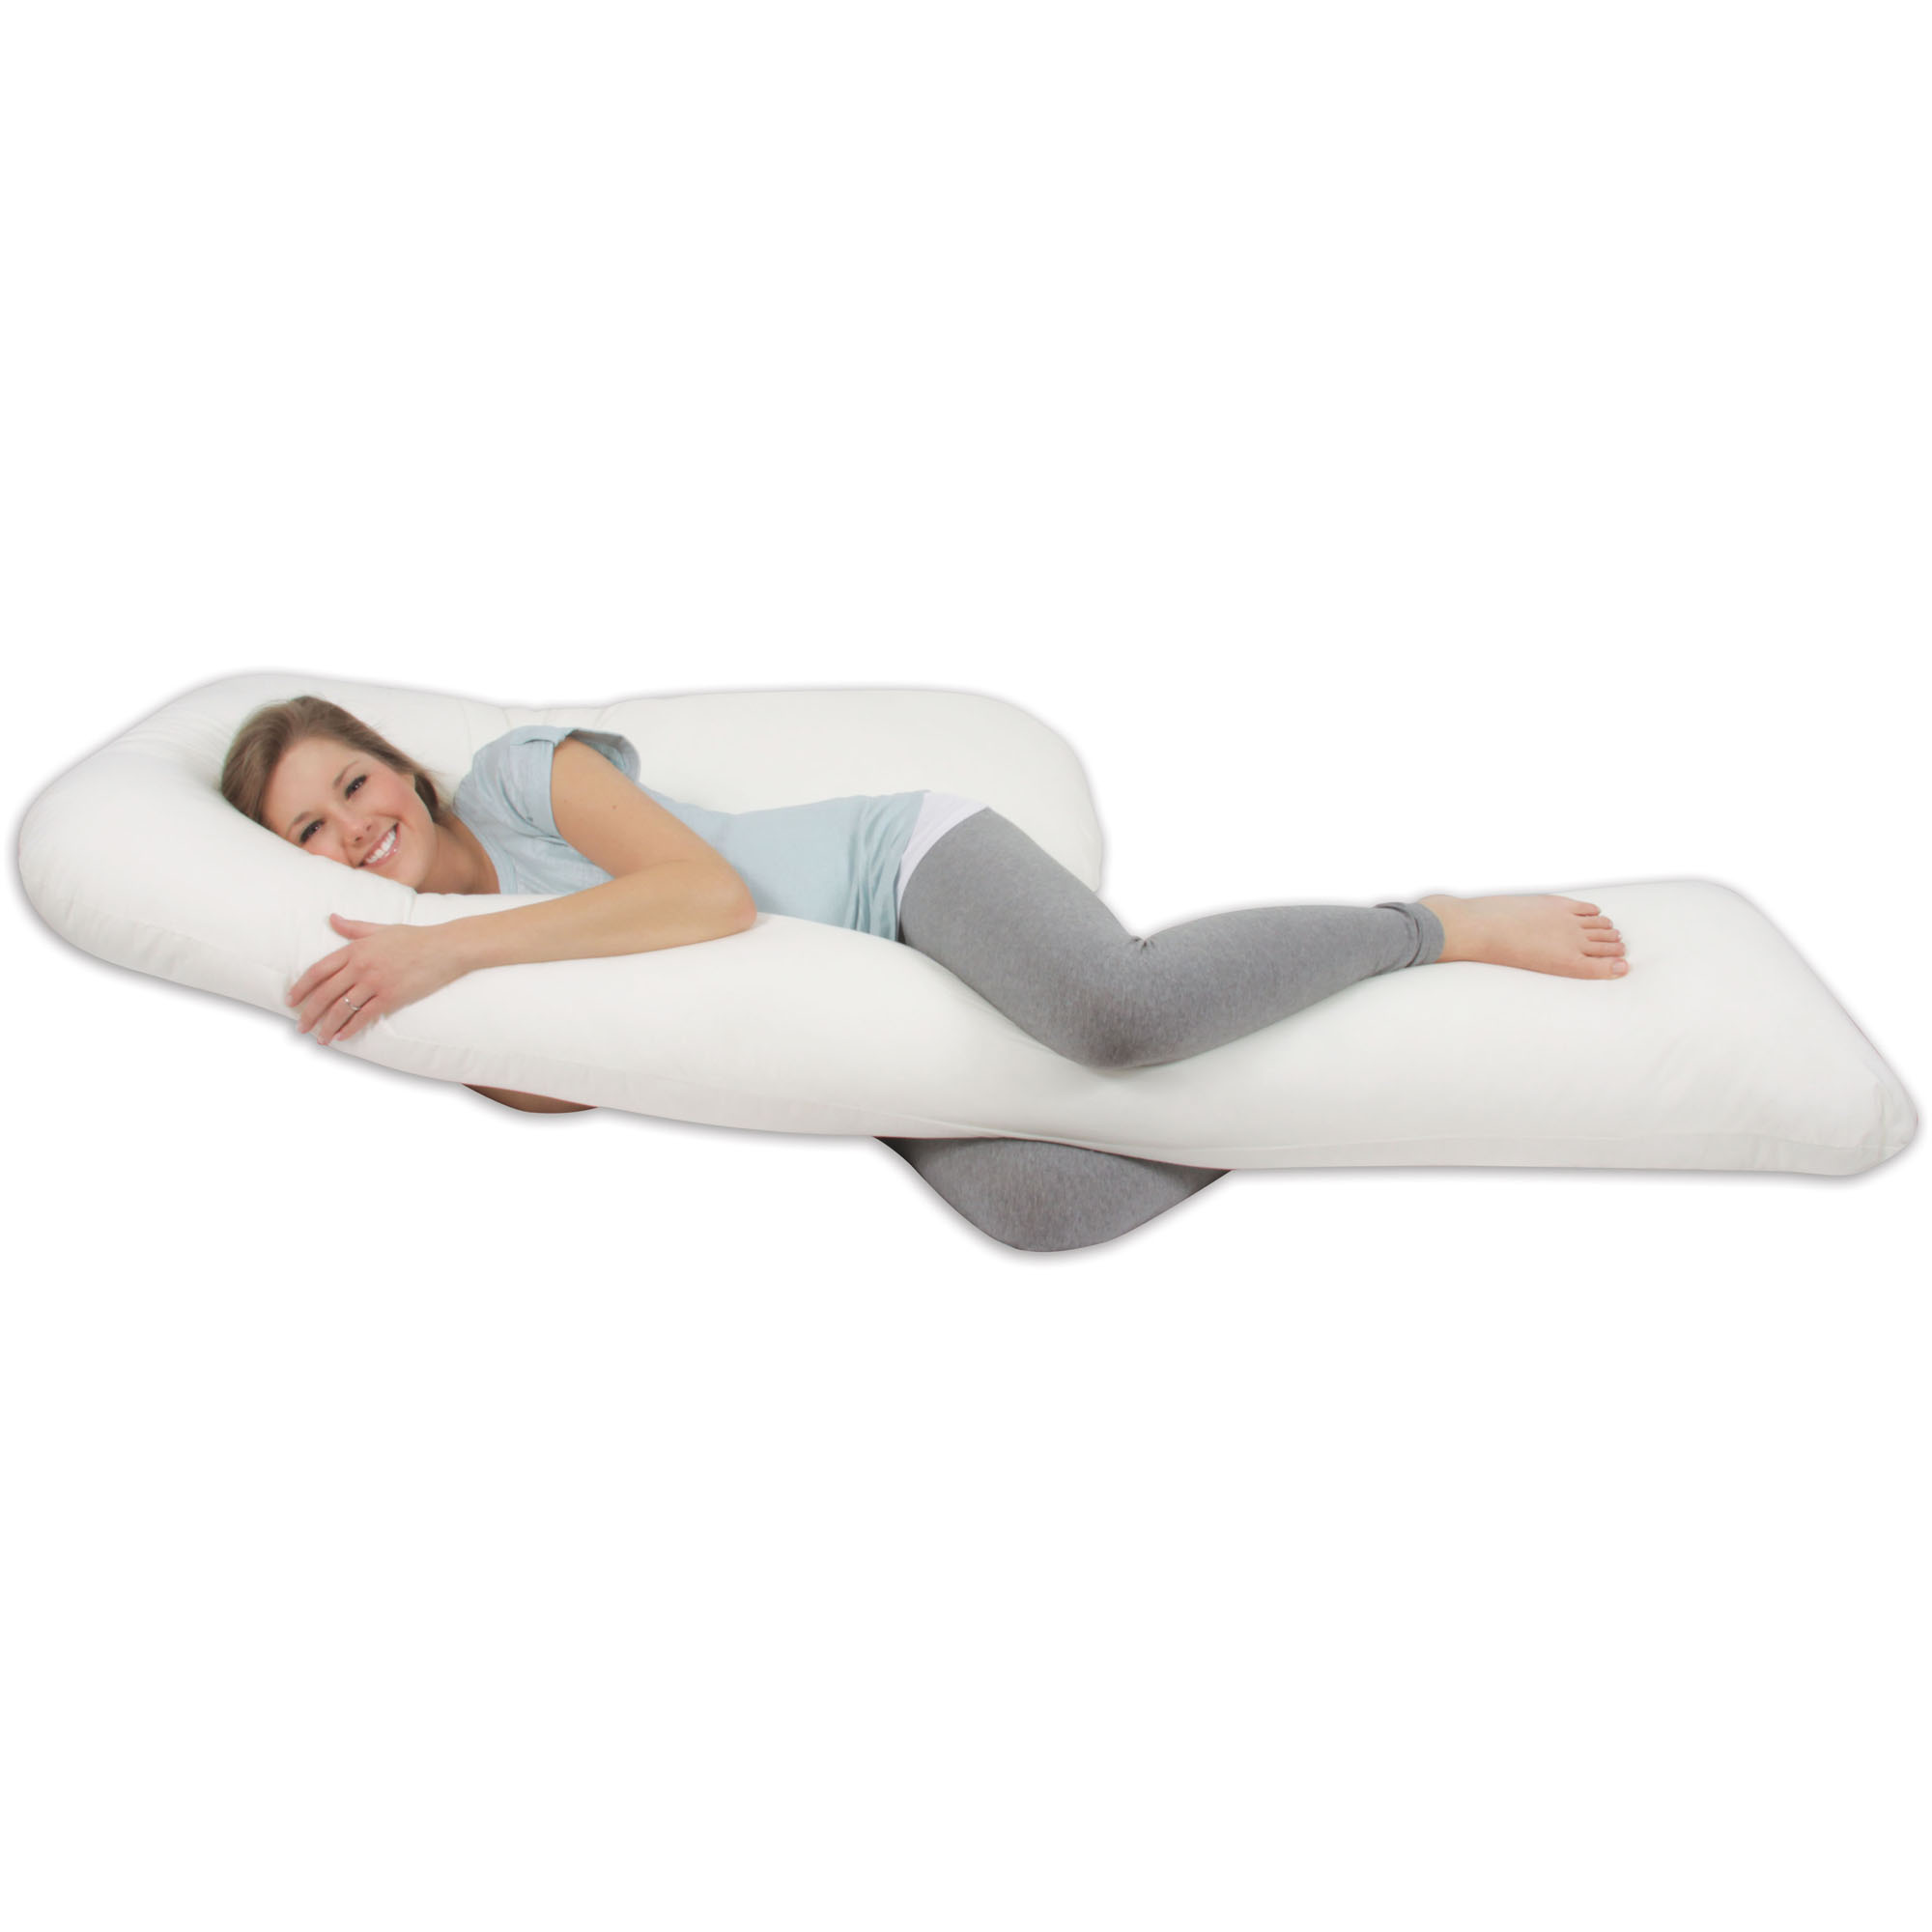 Leachco All Nighter Total Body Pregnancy Pillow, Ivory - image 2 of 5